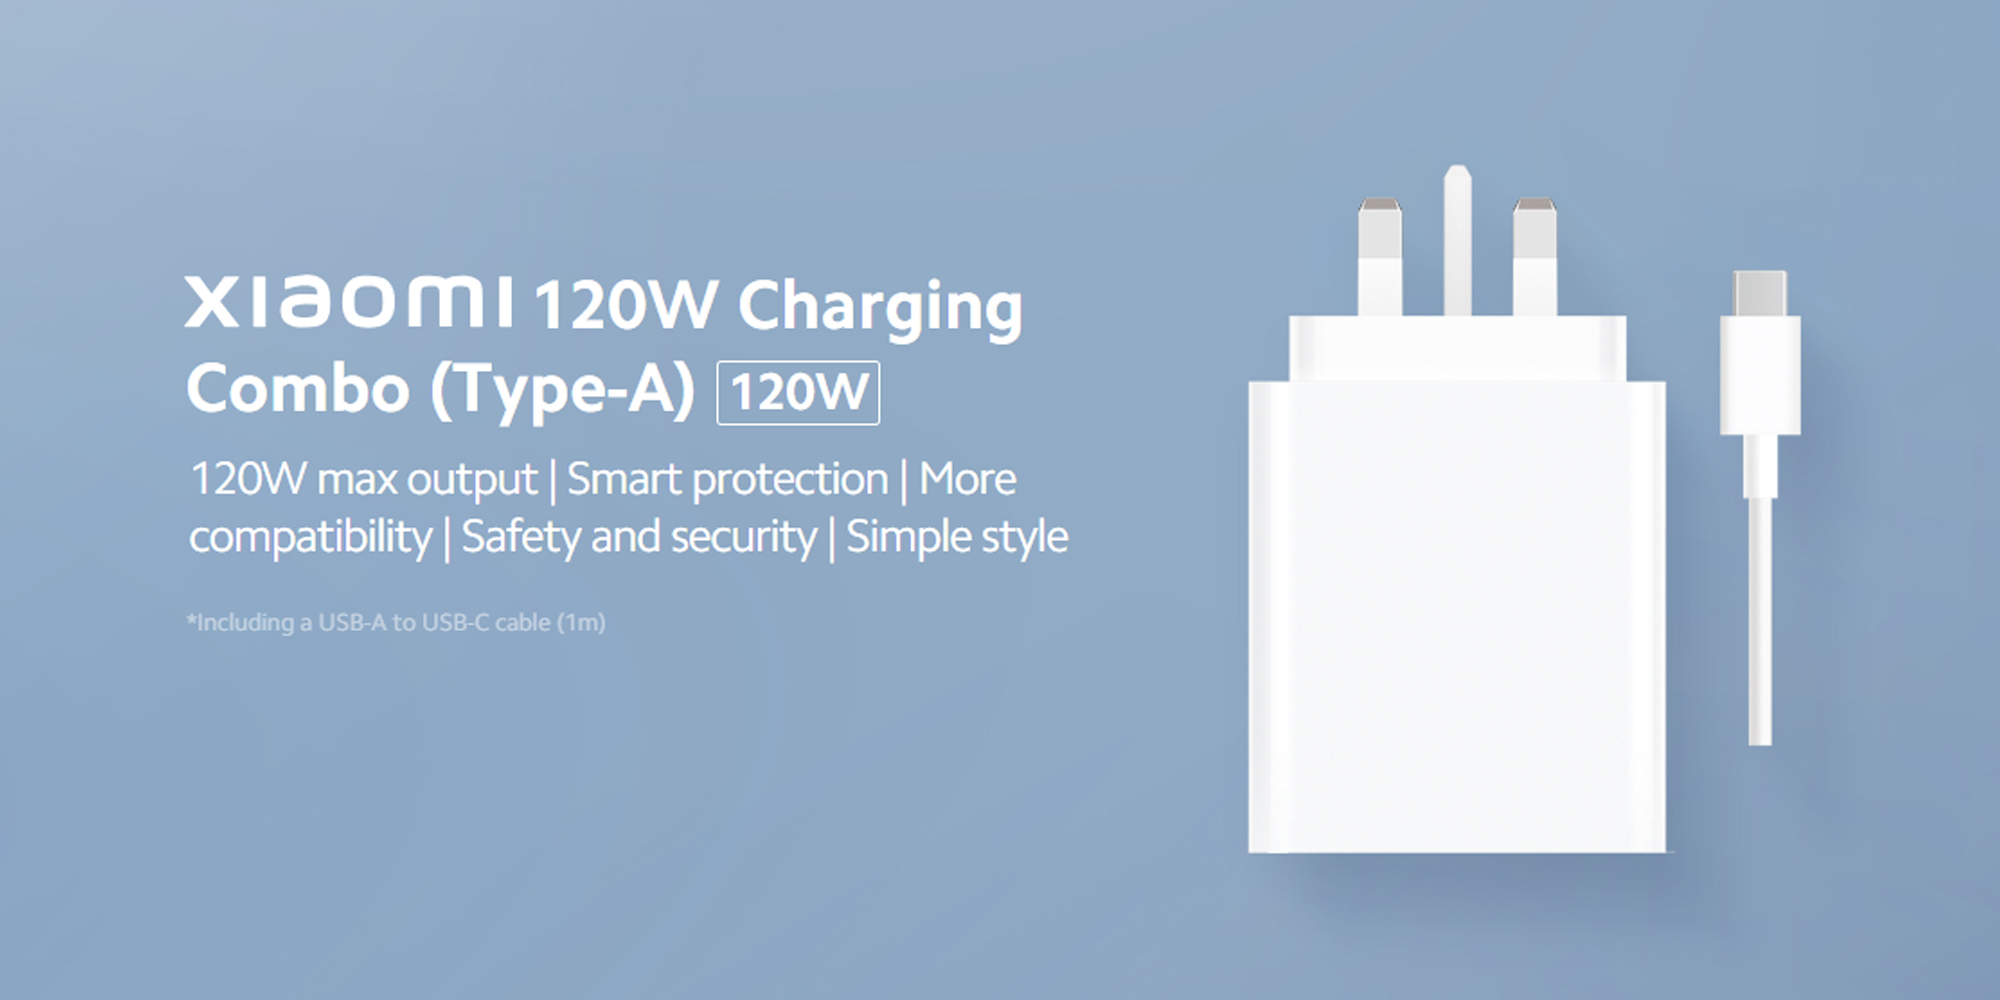 Xiaomi 120W Charging Combo (Type-A) - 6934177787522 - A+ content